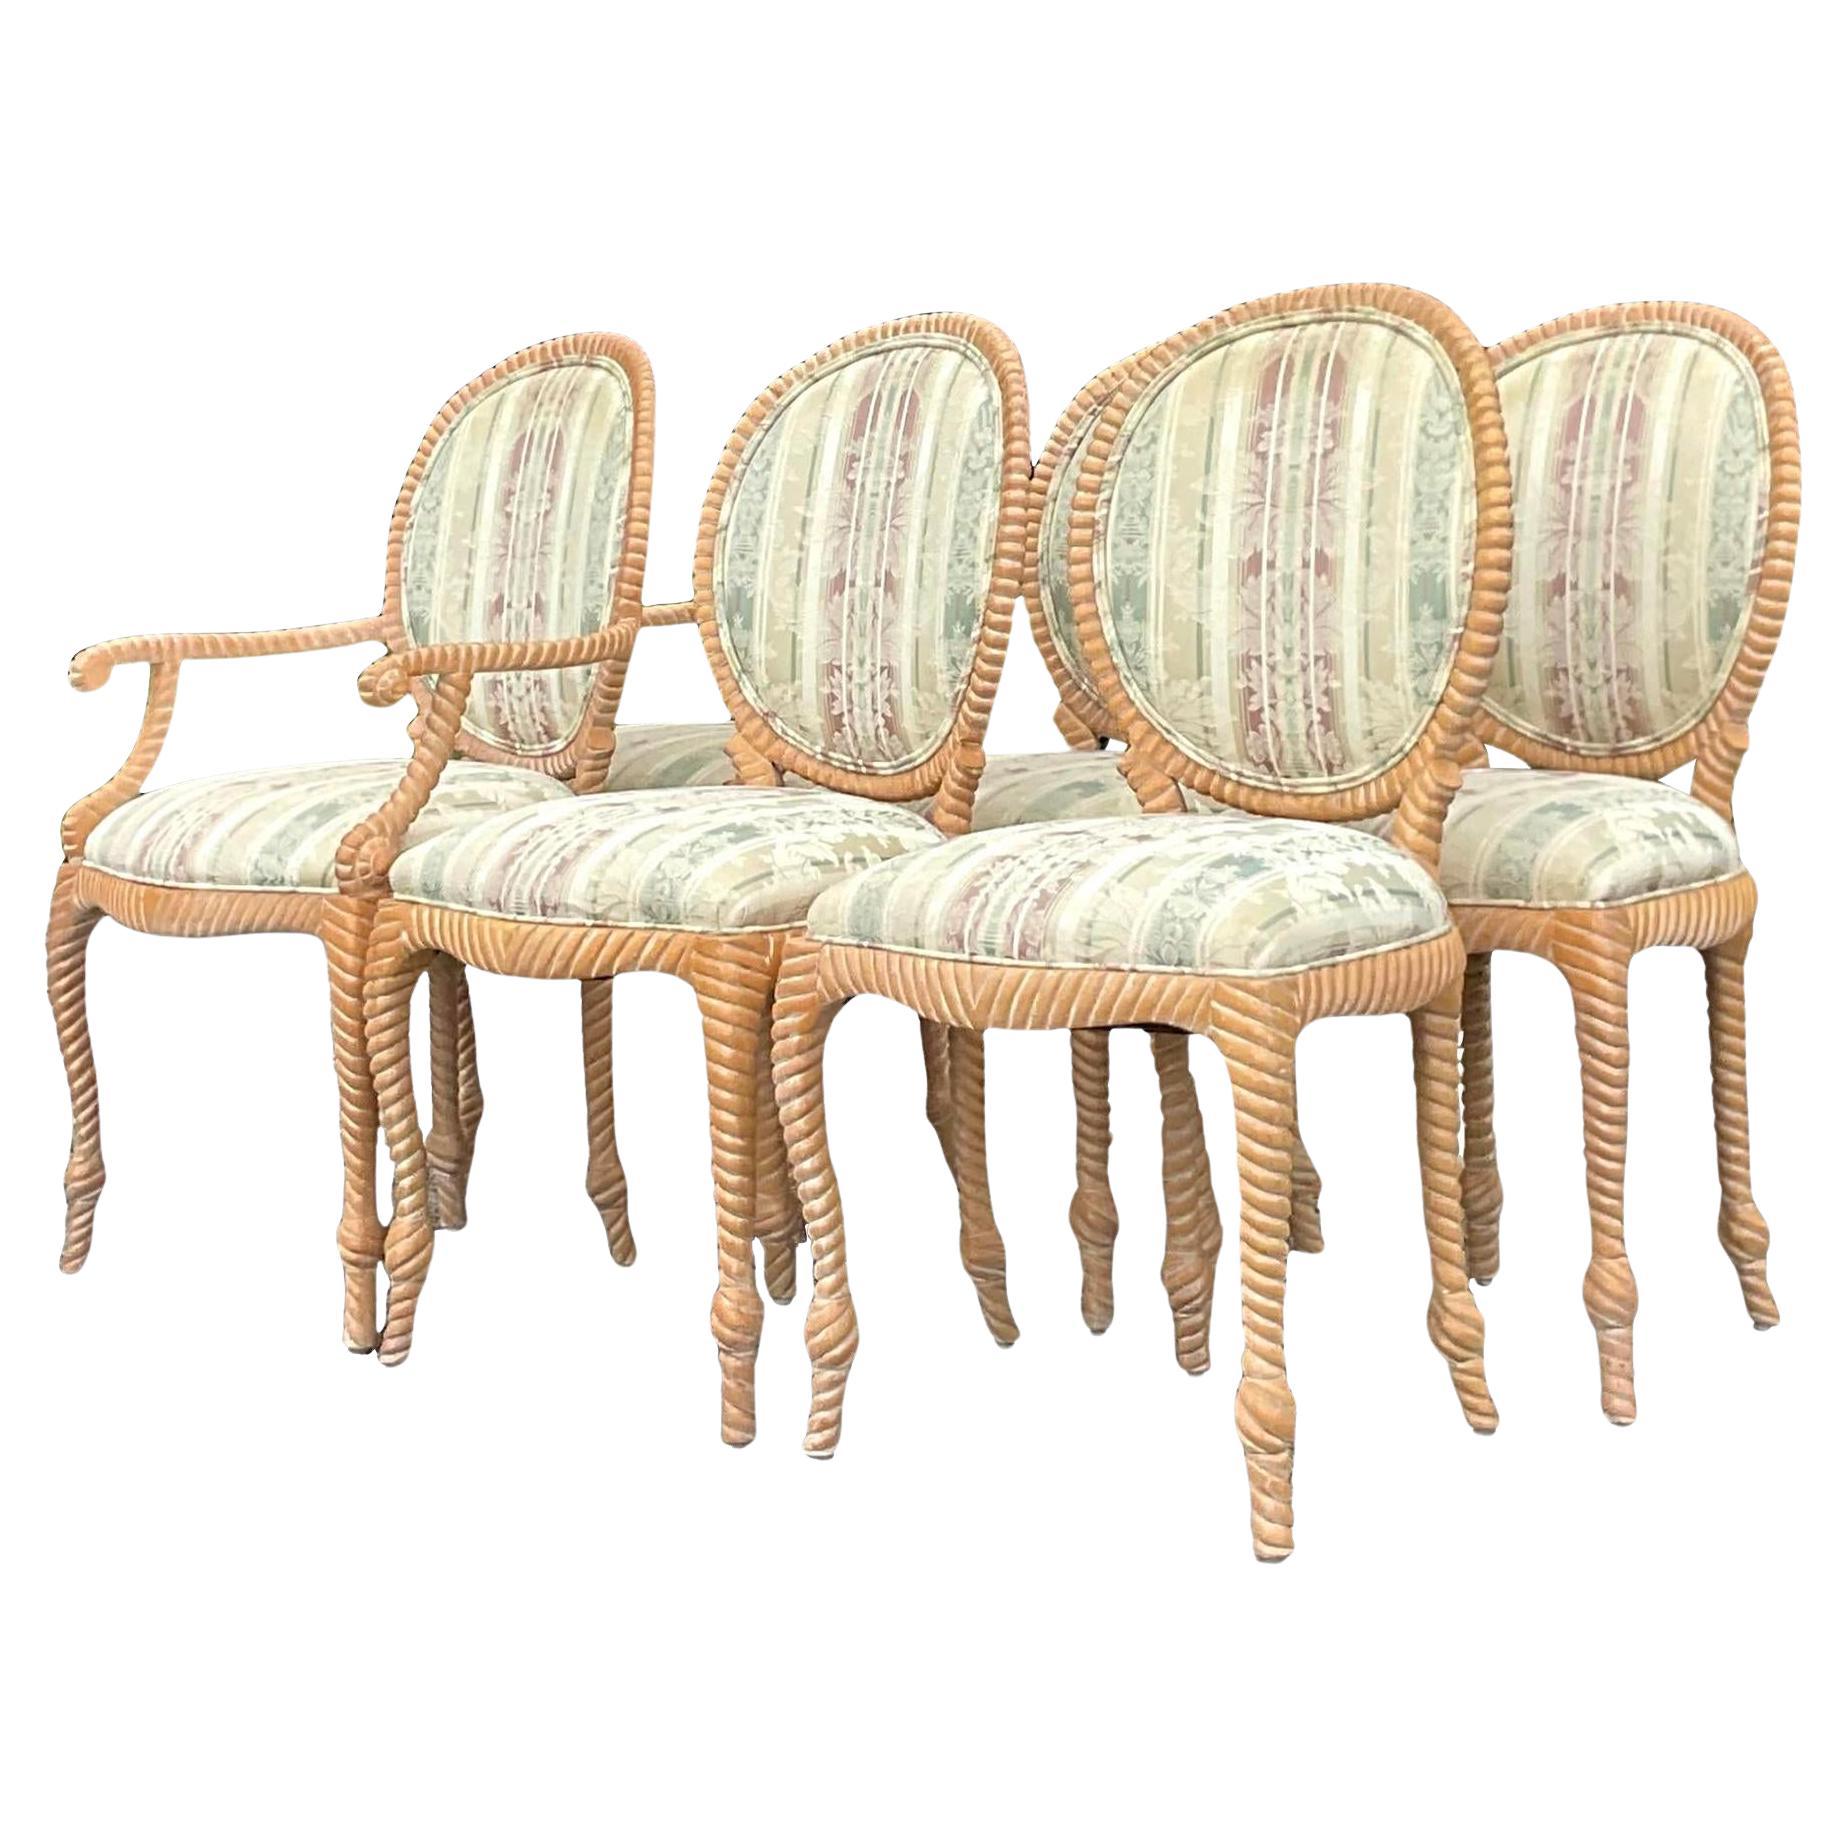 Vintage Boho Spanish Carved Rope Dining Chairs - Set of 6